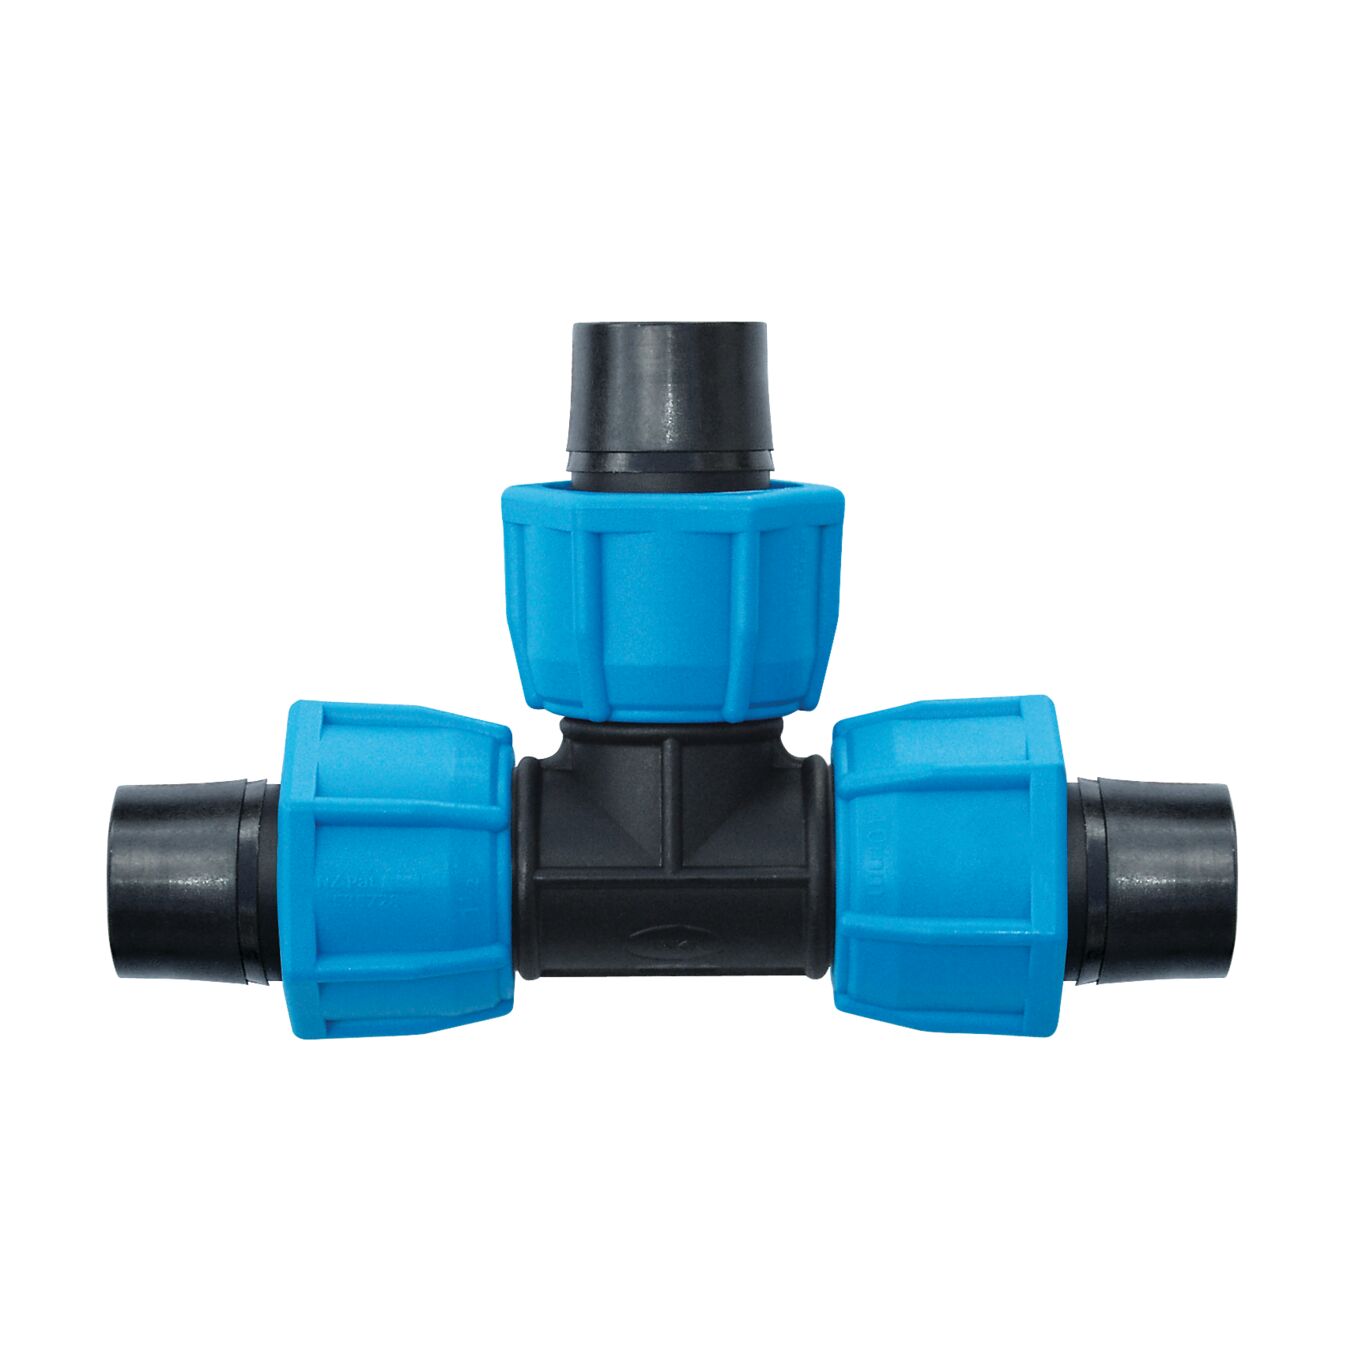 Product Image - Pipe Fittings - Fitting Tee